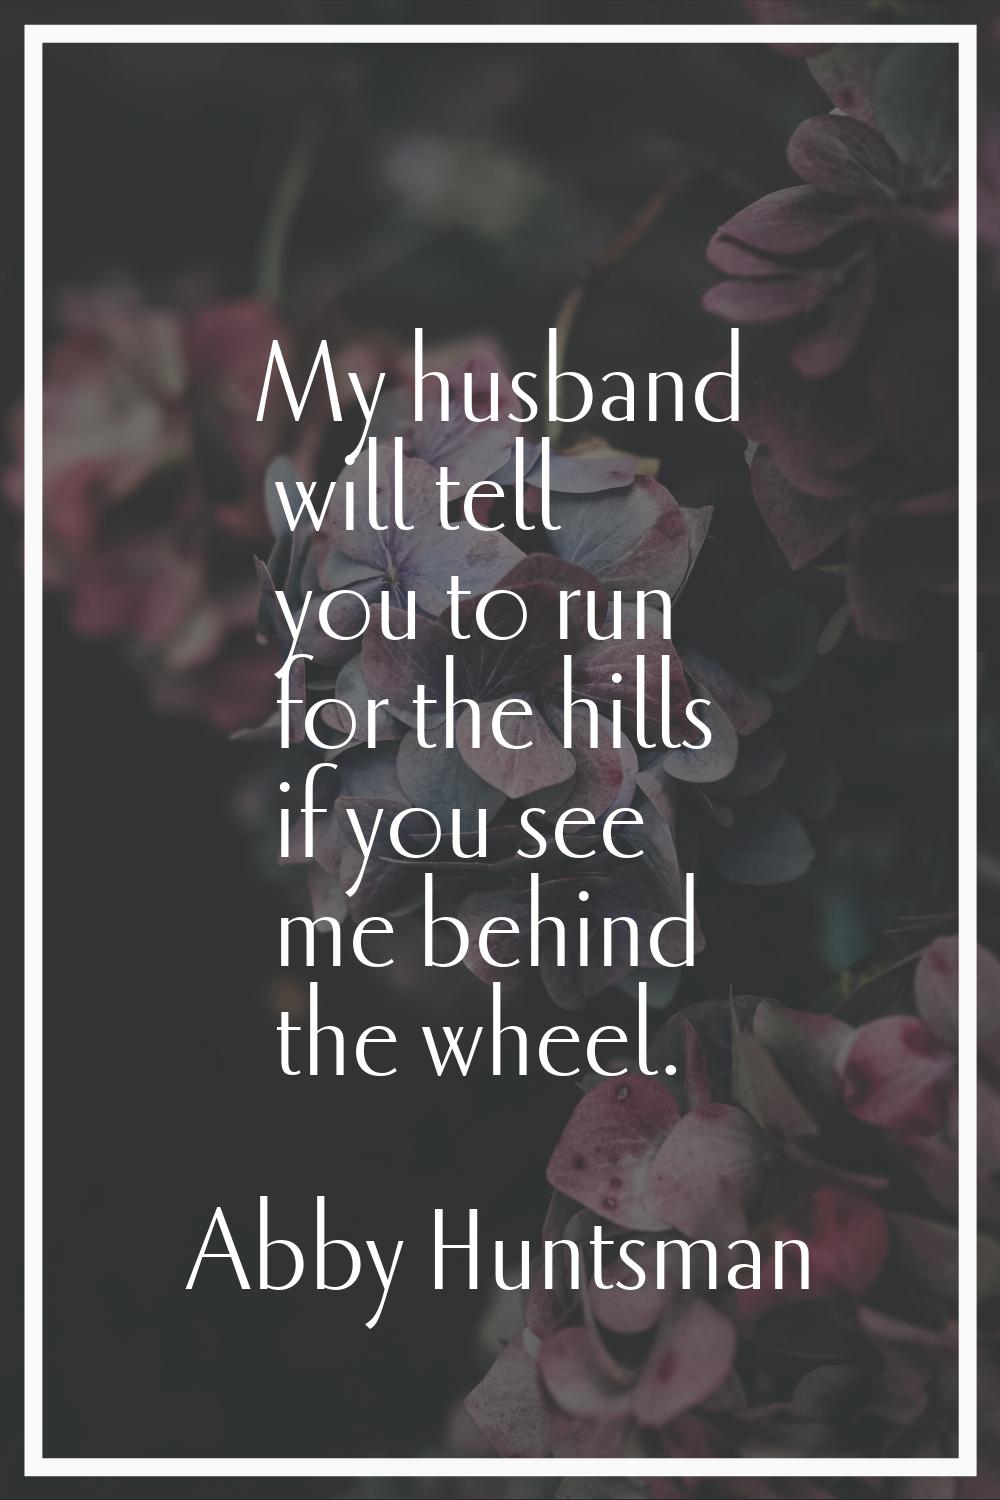 My husband will tell you to run for the hills if you see me behind the wheel.